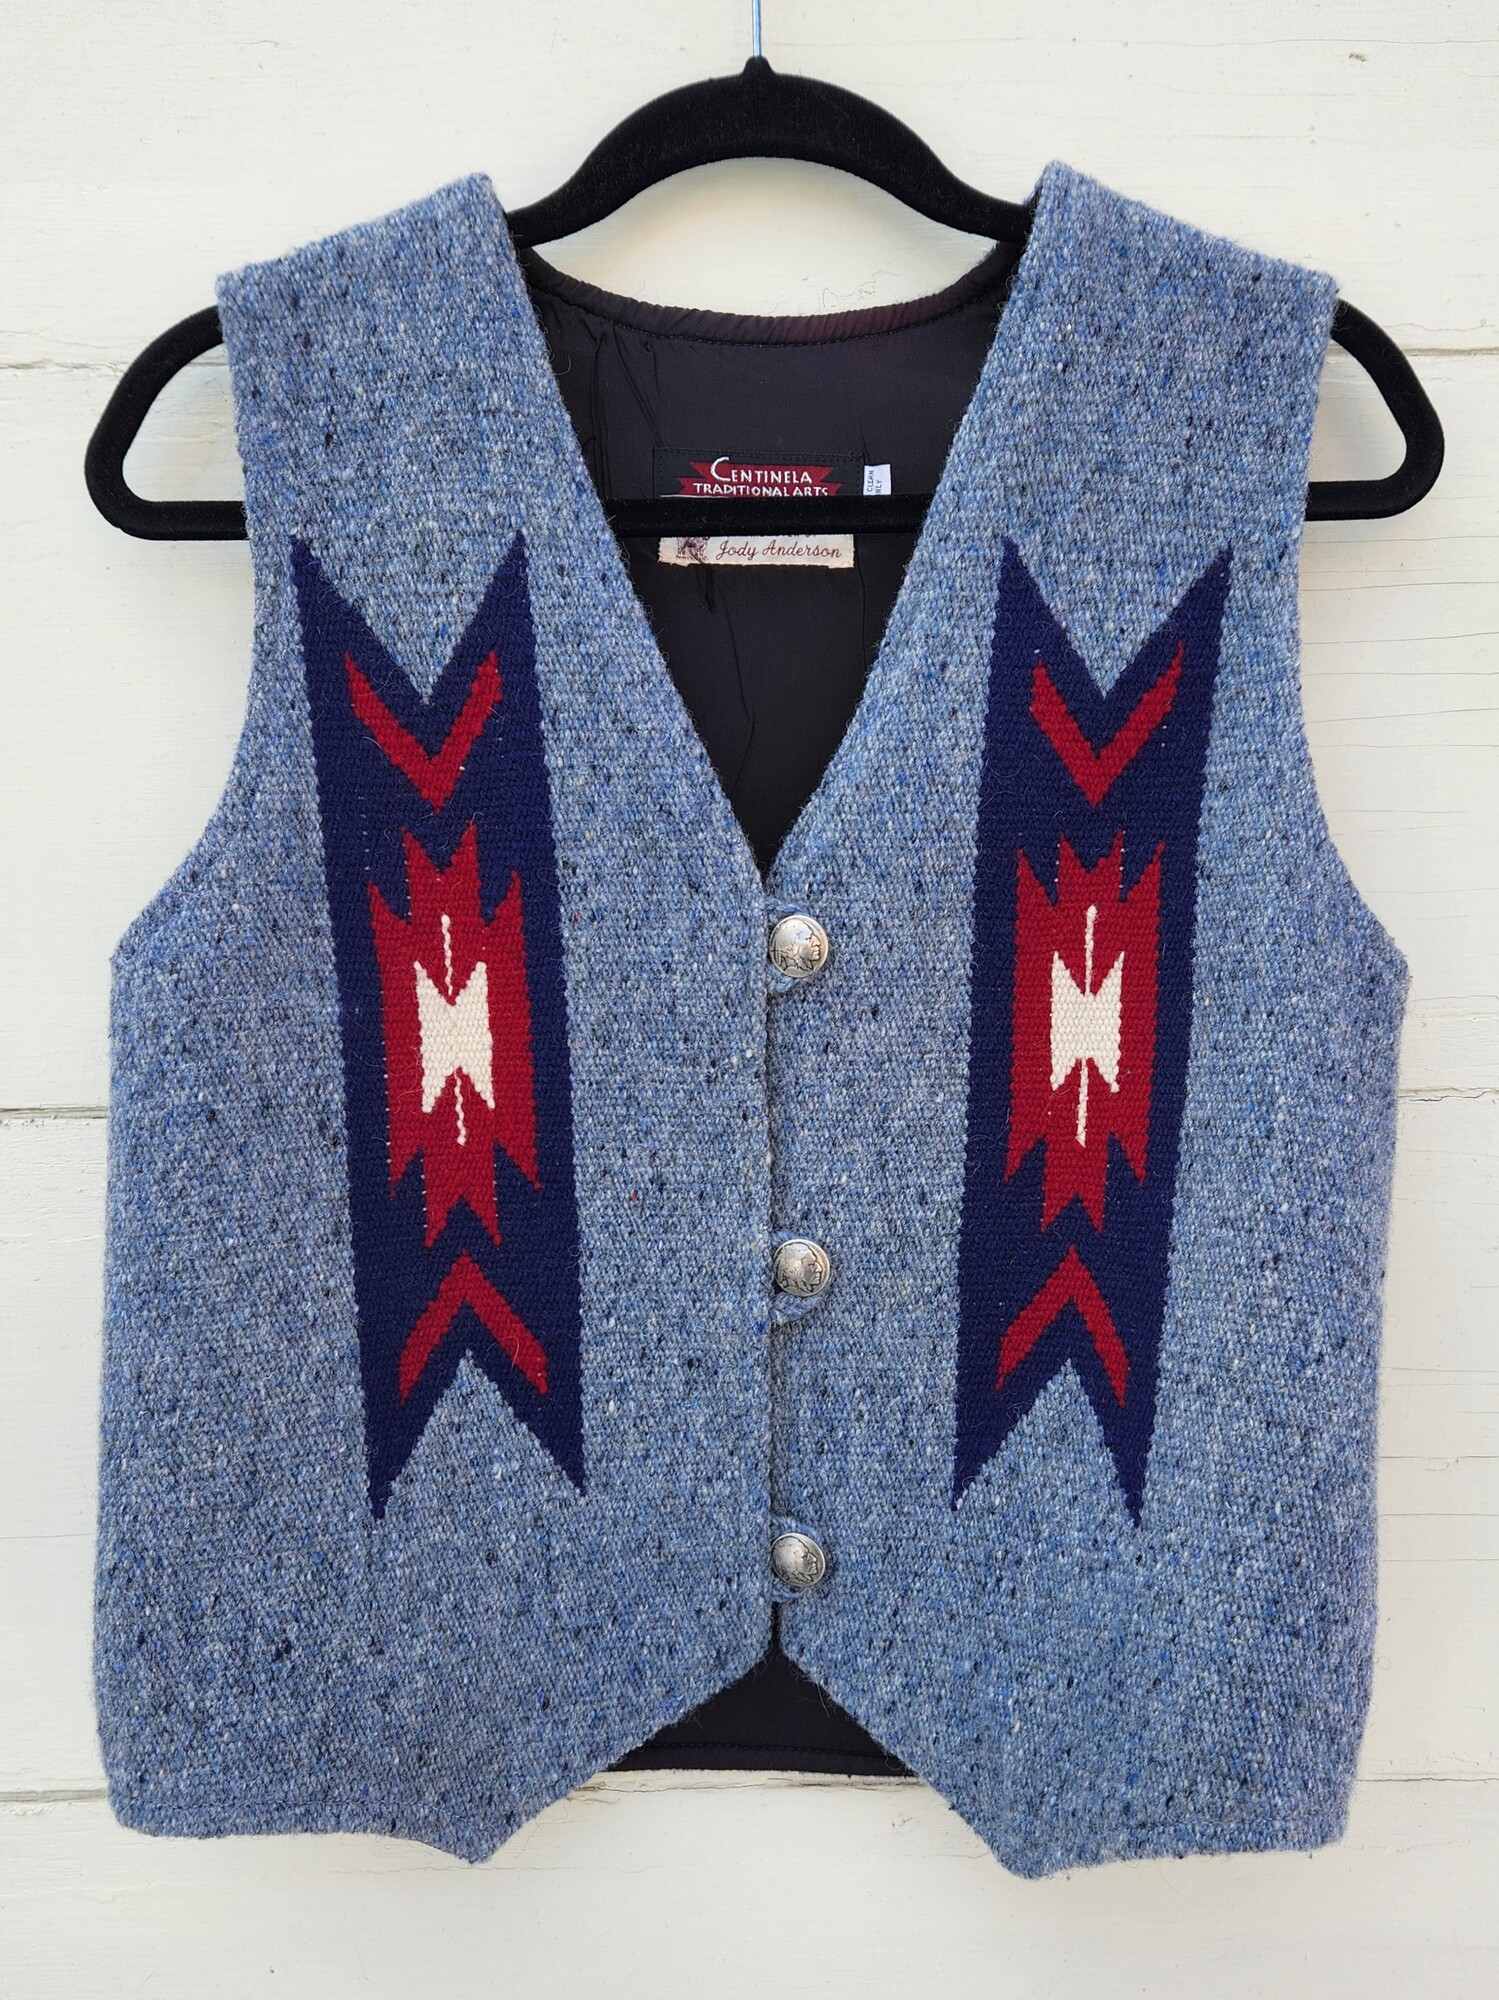 Vintage Centinela Traditional Arts Hand-woven Wool Vest size 36
This style of vest has been done for many years in Chimayo. This Vest was hand-woven by Jody Anderson. It consists of some variation of Chimayo designs on front and back panels. Blue Wool with red, white and navy included in its design. Three 1 inch pewter buttons.  Size is missing but it is the size of a 36.
Pit to Pit 19 inches across
Waist 19 inches across
Down the back 20 inches
EUC
Retail $360